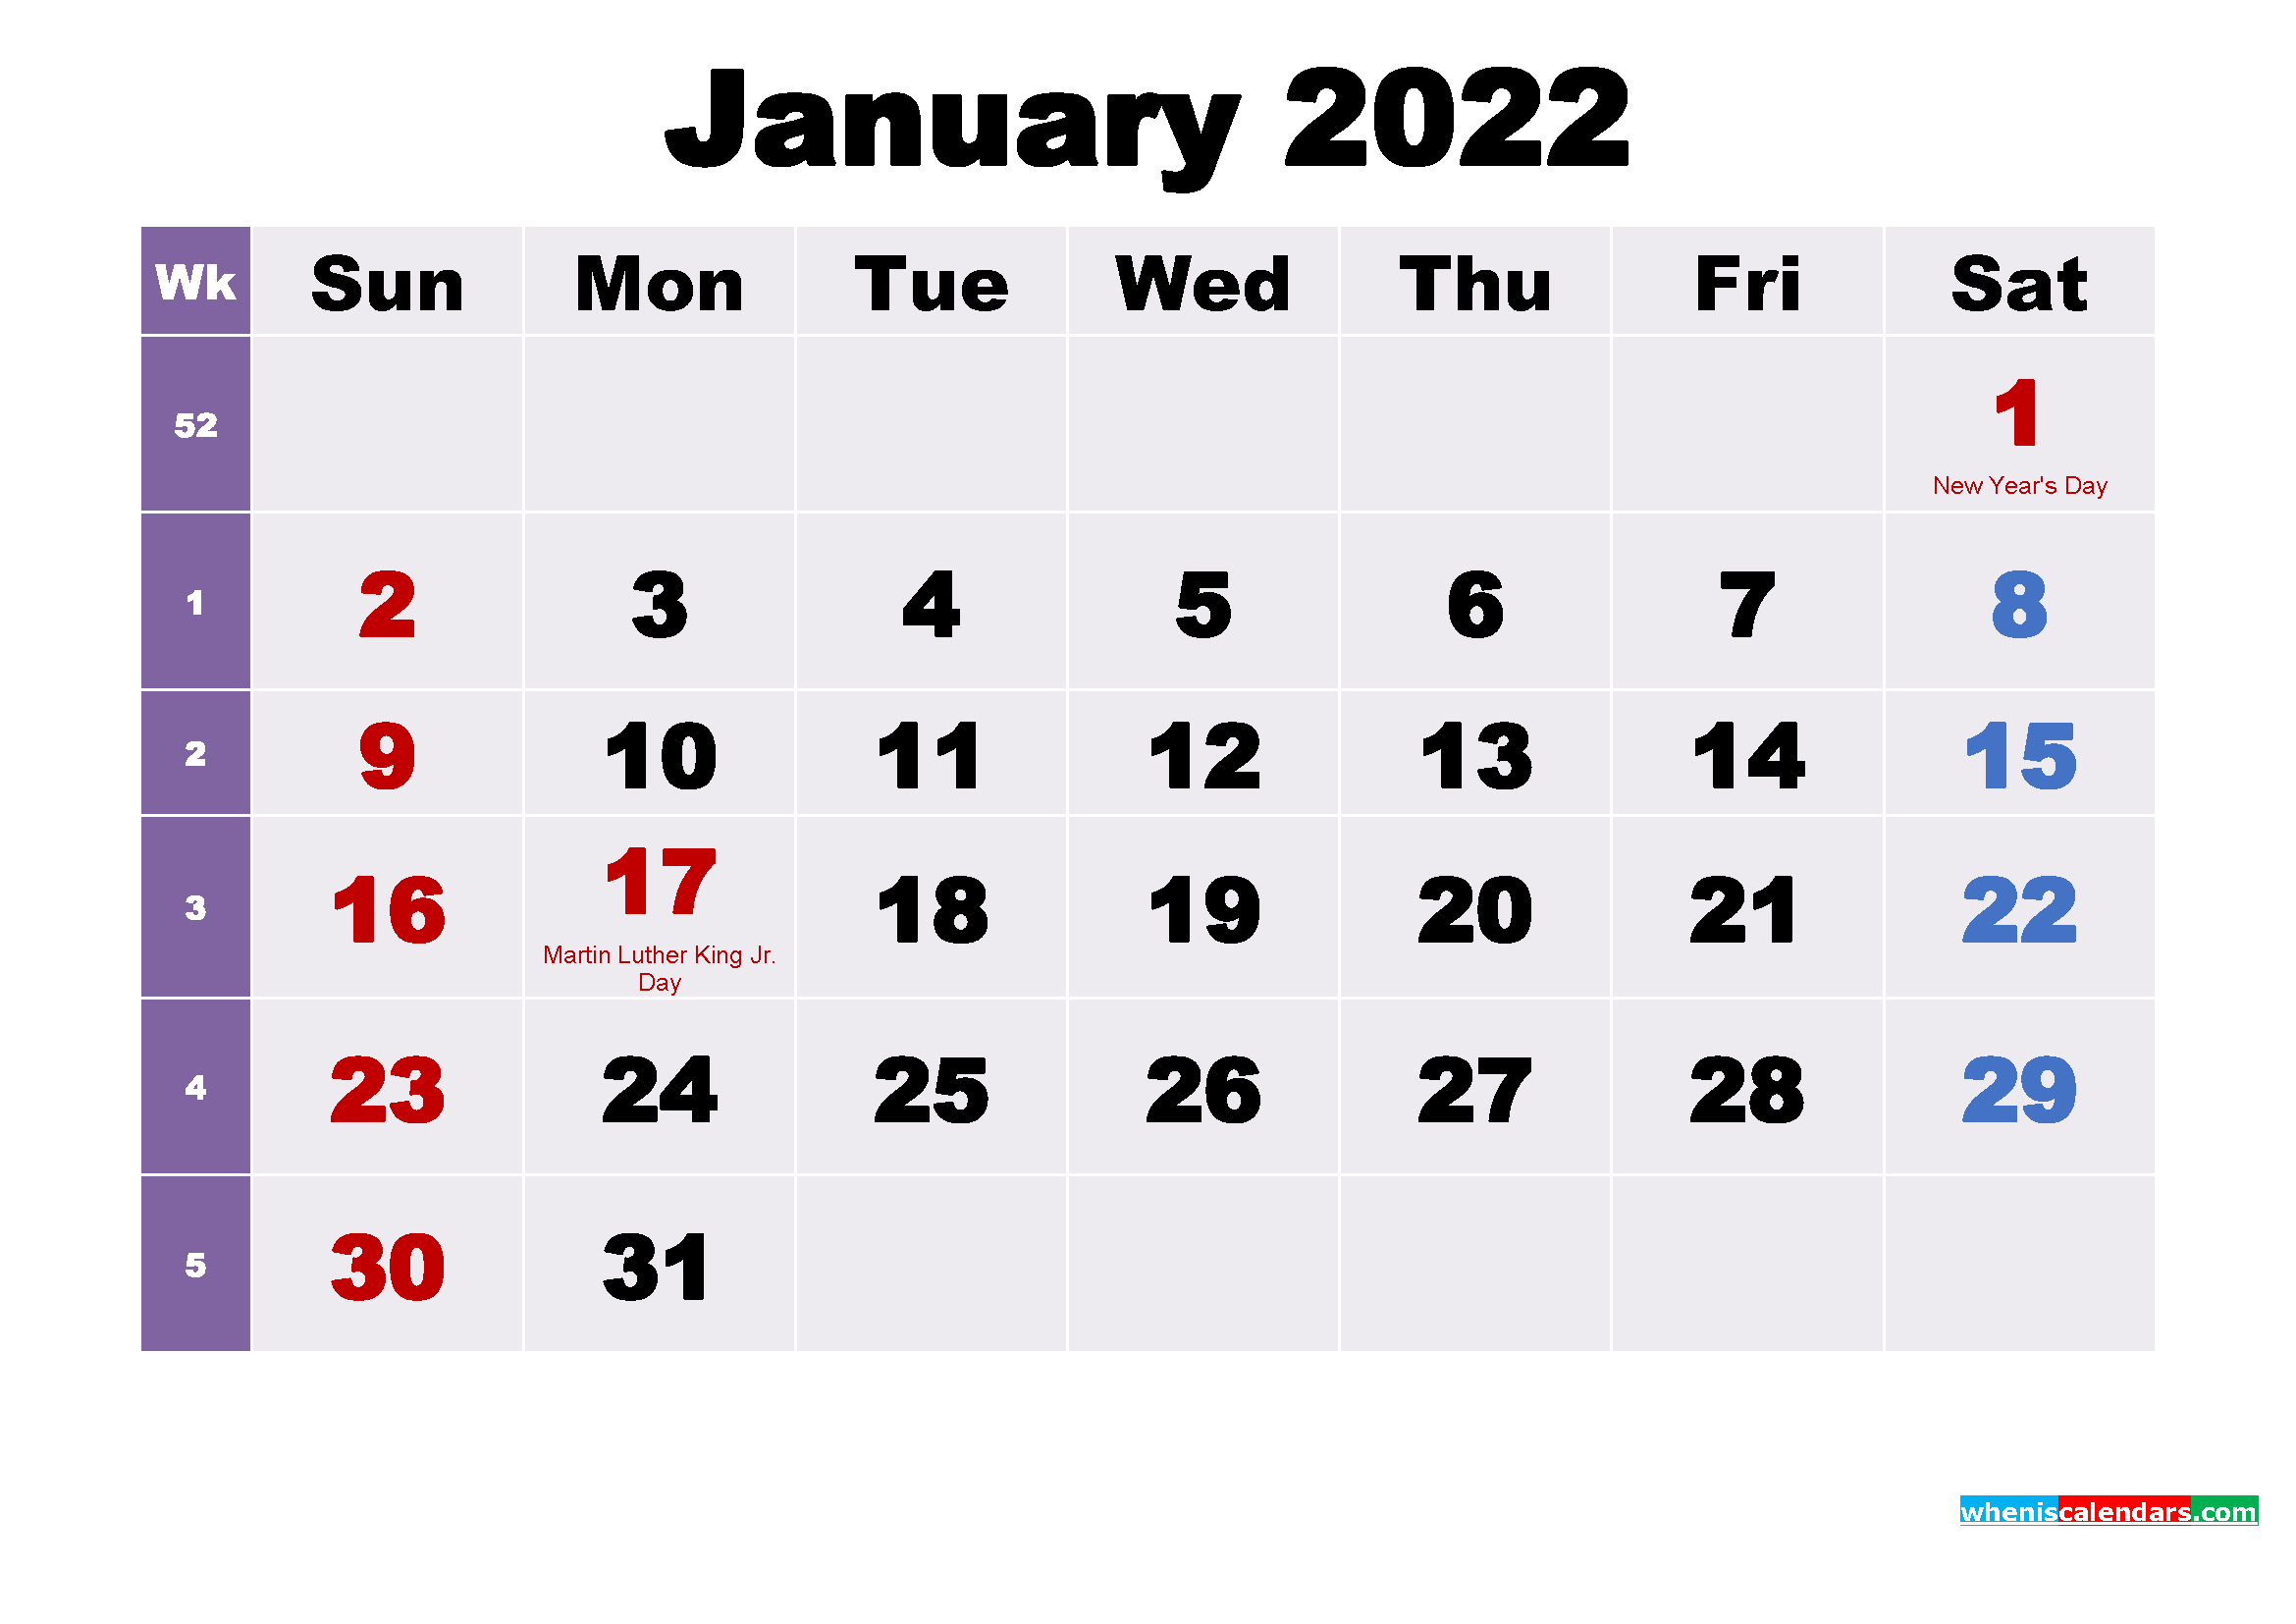 January 2022 Calendar With Holidays Wallpapers